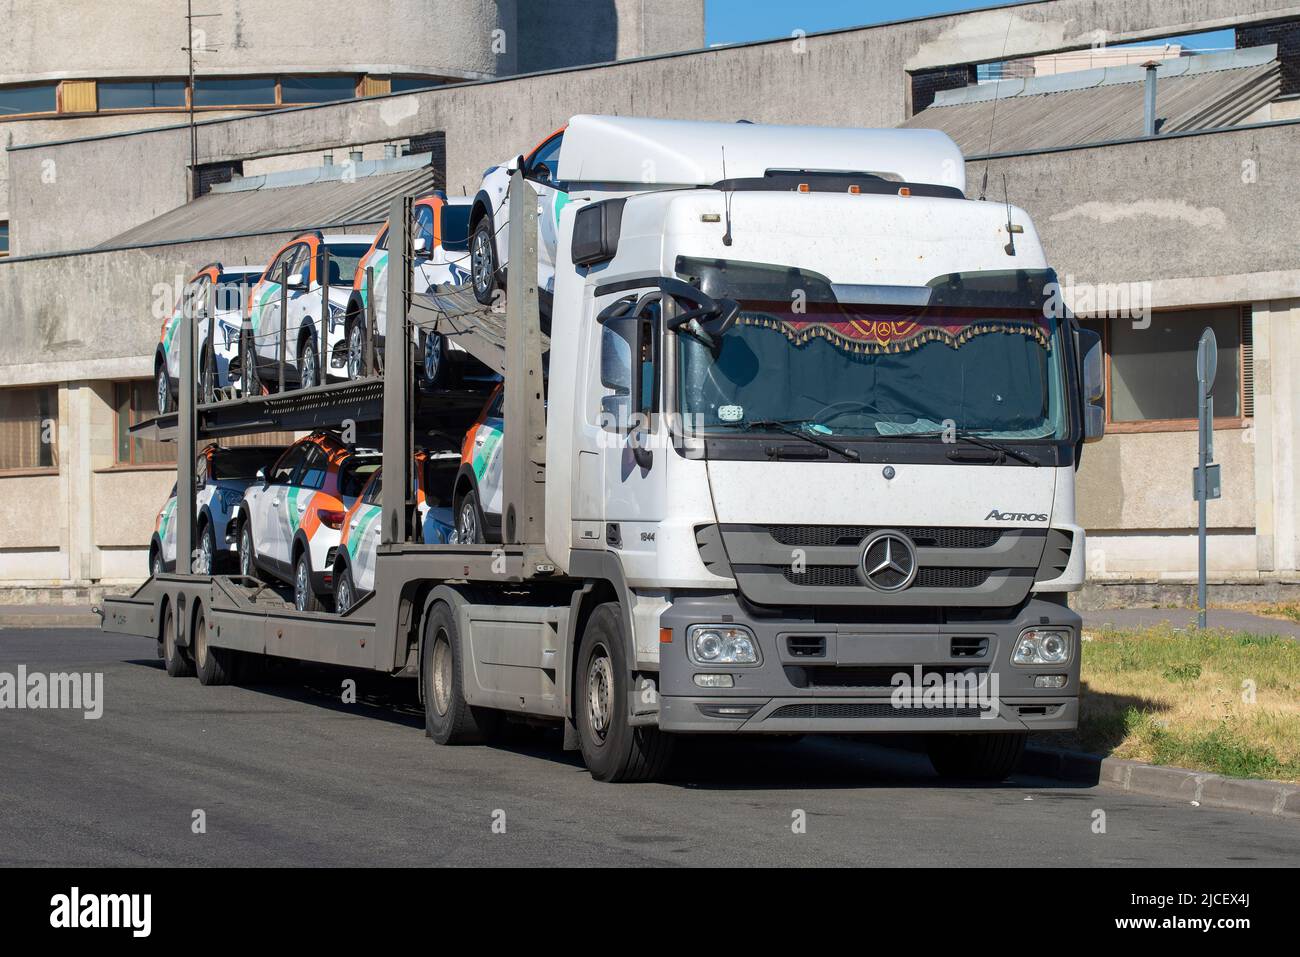 SAINT PETERSBURG, RUSSIA - JULY 17, 2021: Car transporter 'Mercedes Benz' with new cars of the carsharing company 'Delimobil' waiting for unloading Stock Photo